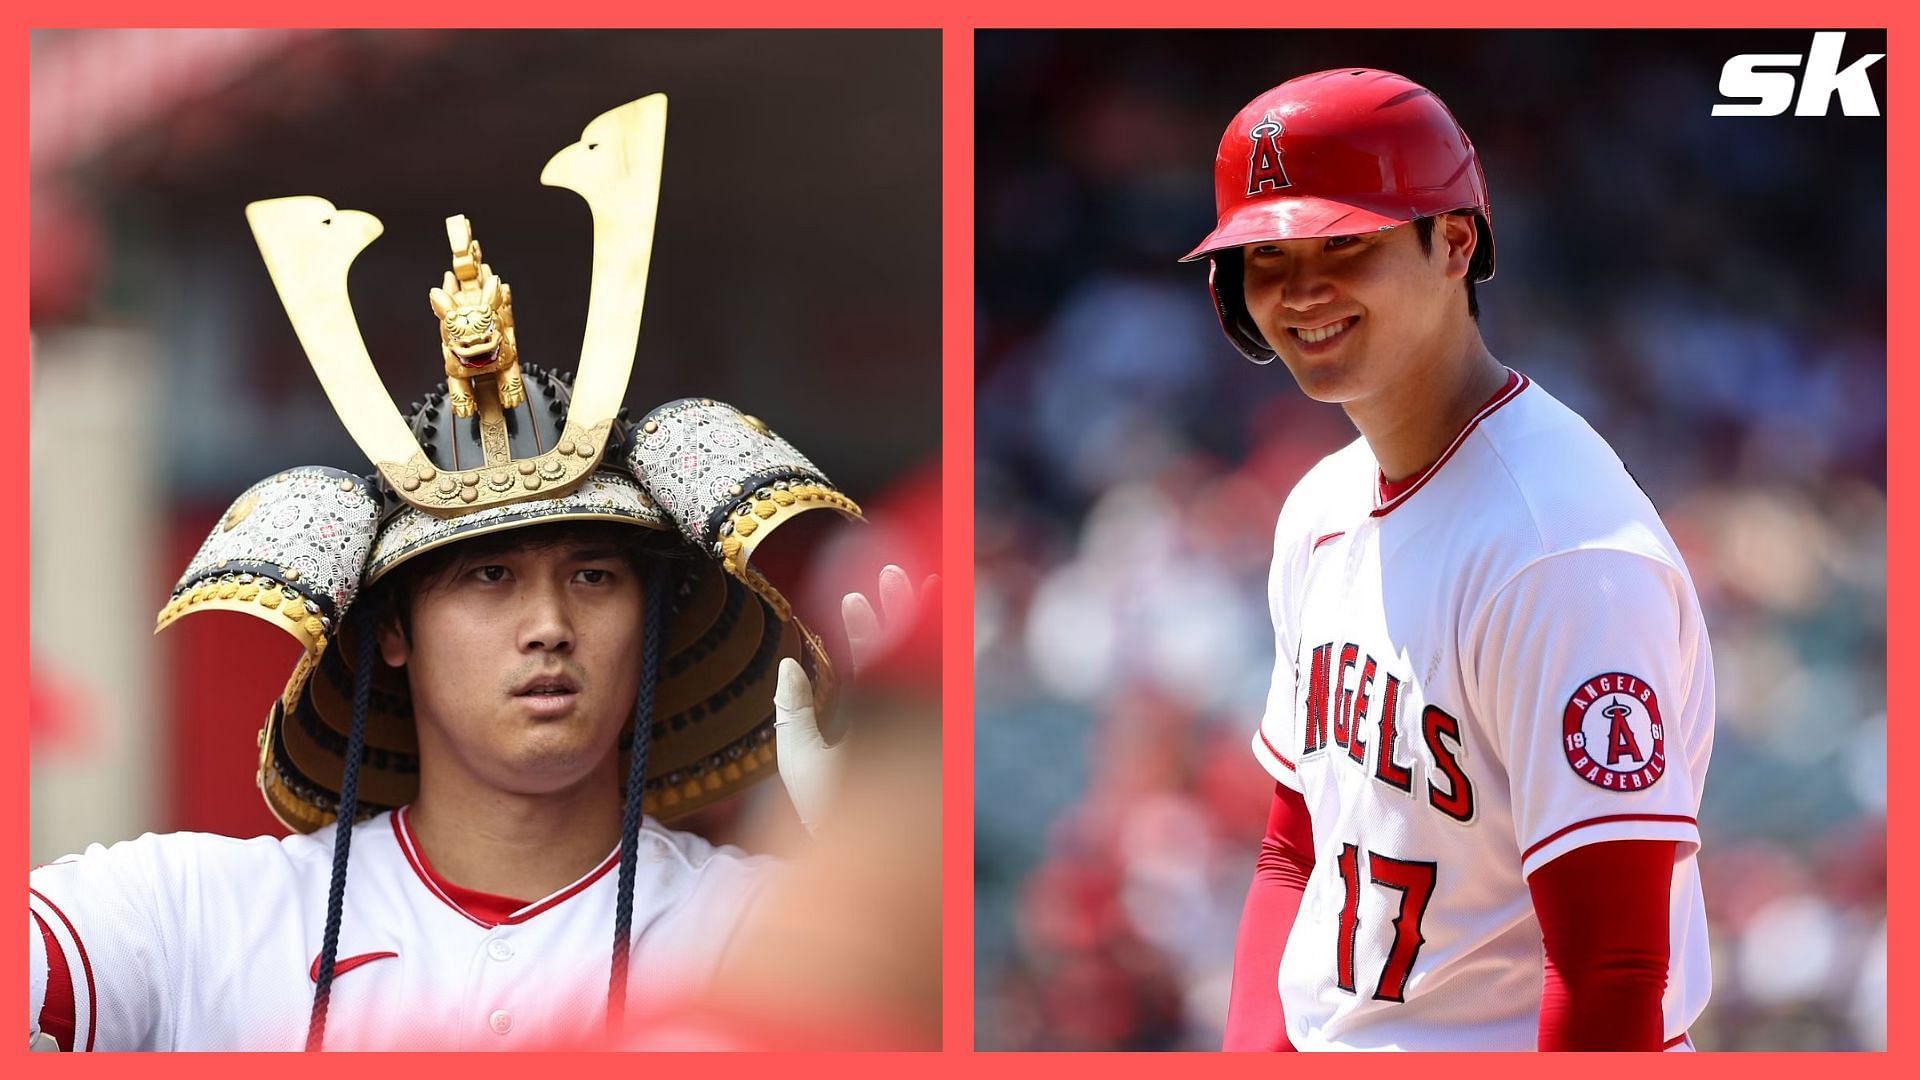 Shohei Ohtani will reportedly not be traded in 2023